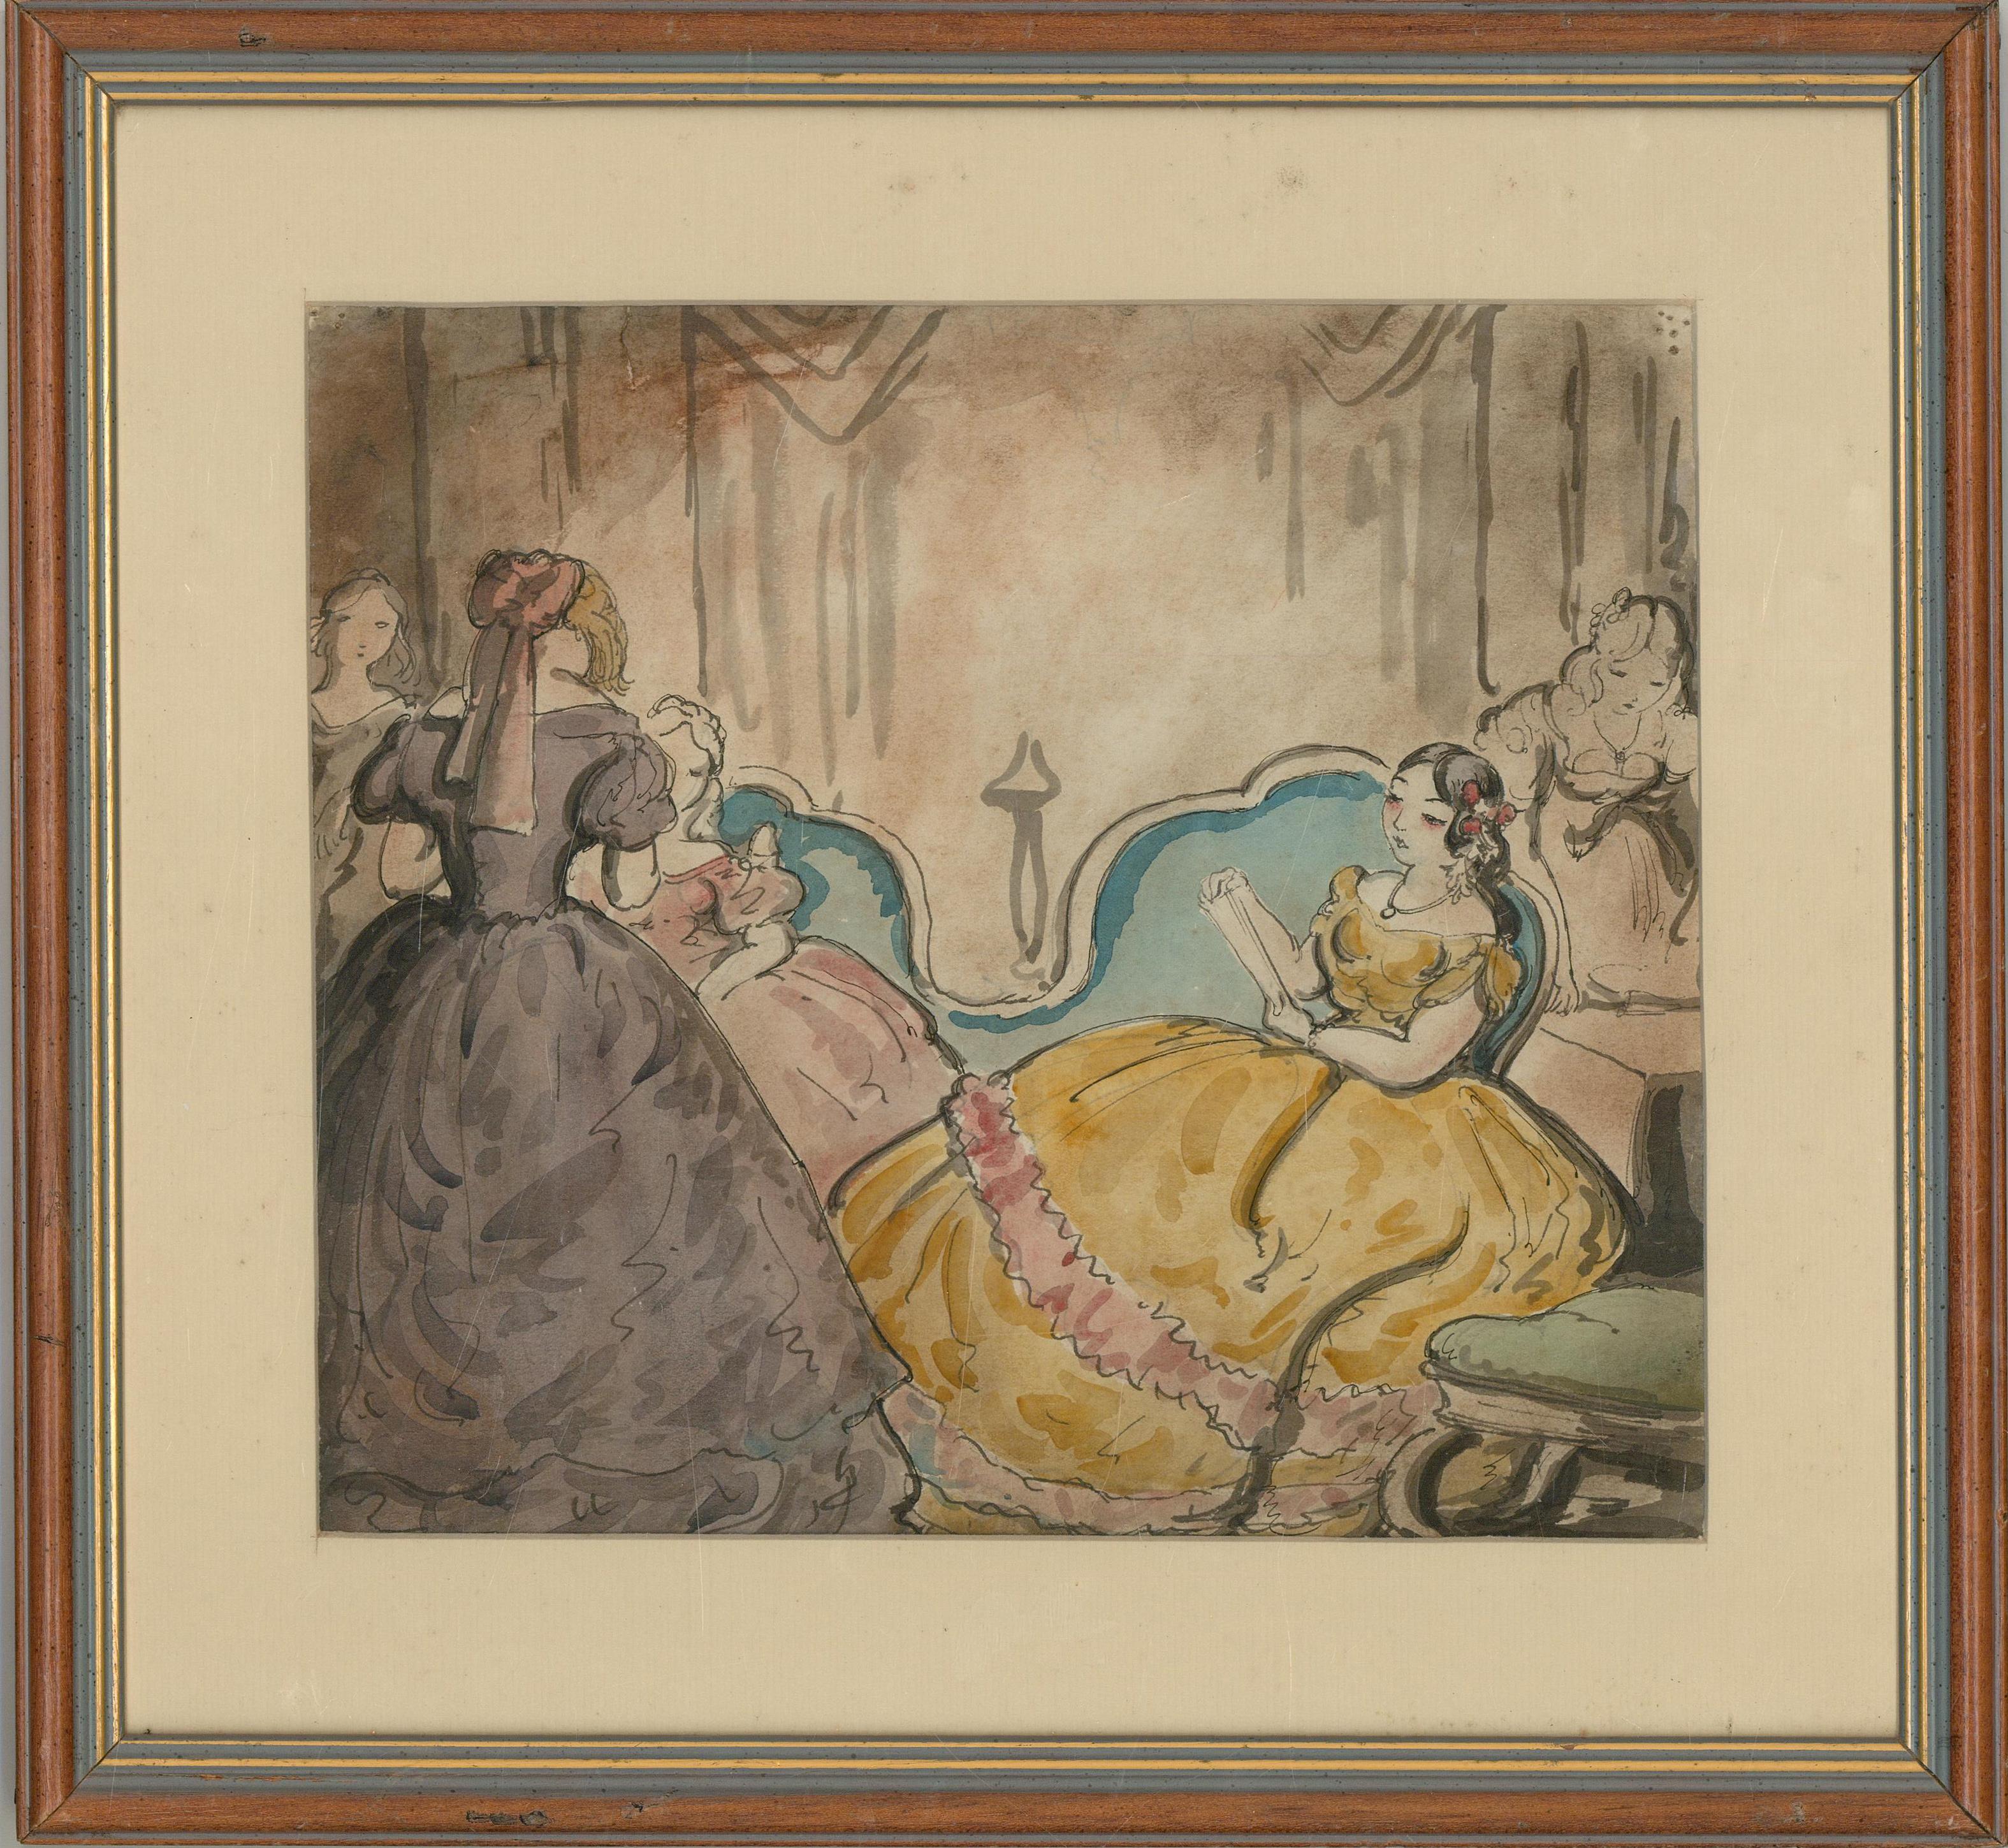 A delightful watercolour painting with pen and ink by the artist Harold Hope Read. The scene depicts a room with several high society ladies, a typical subject in Read's work. Presented in a card mount and in a wooden frame with painted details.